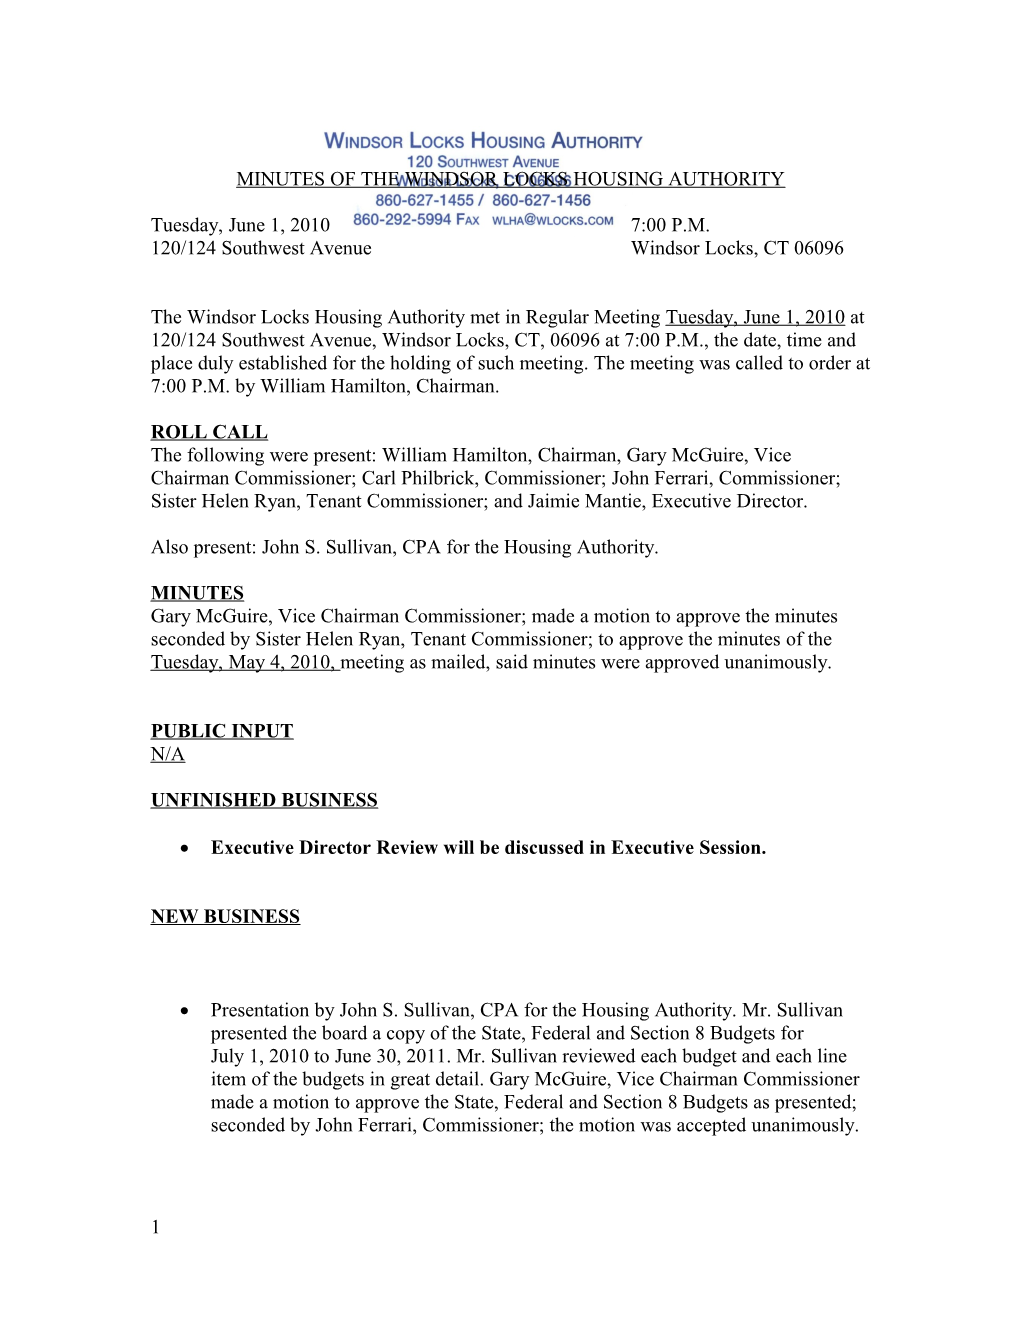 Minutes of the Windsor Locks Housing Authority s1